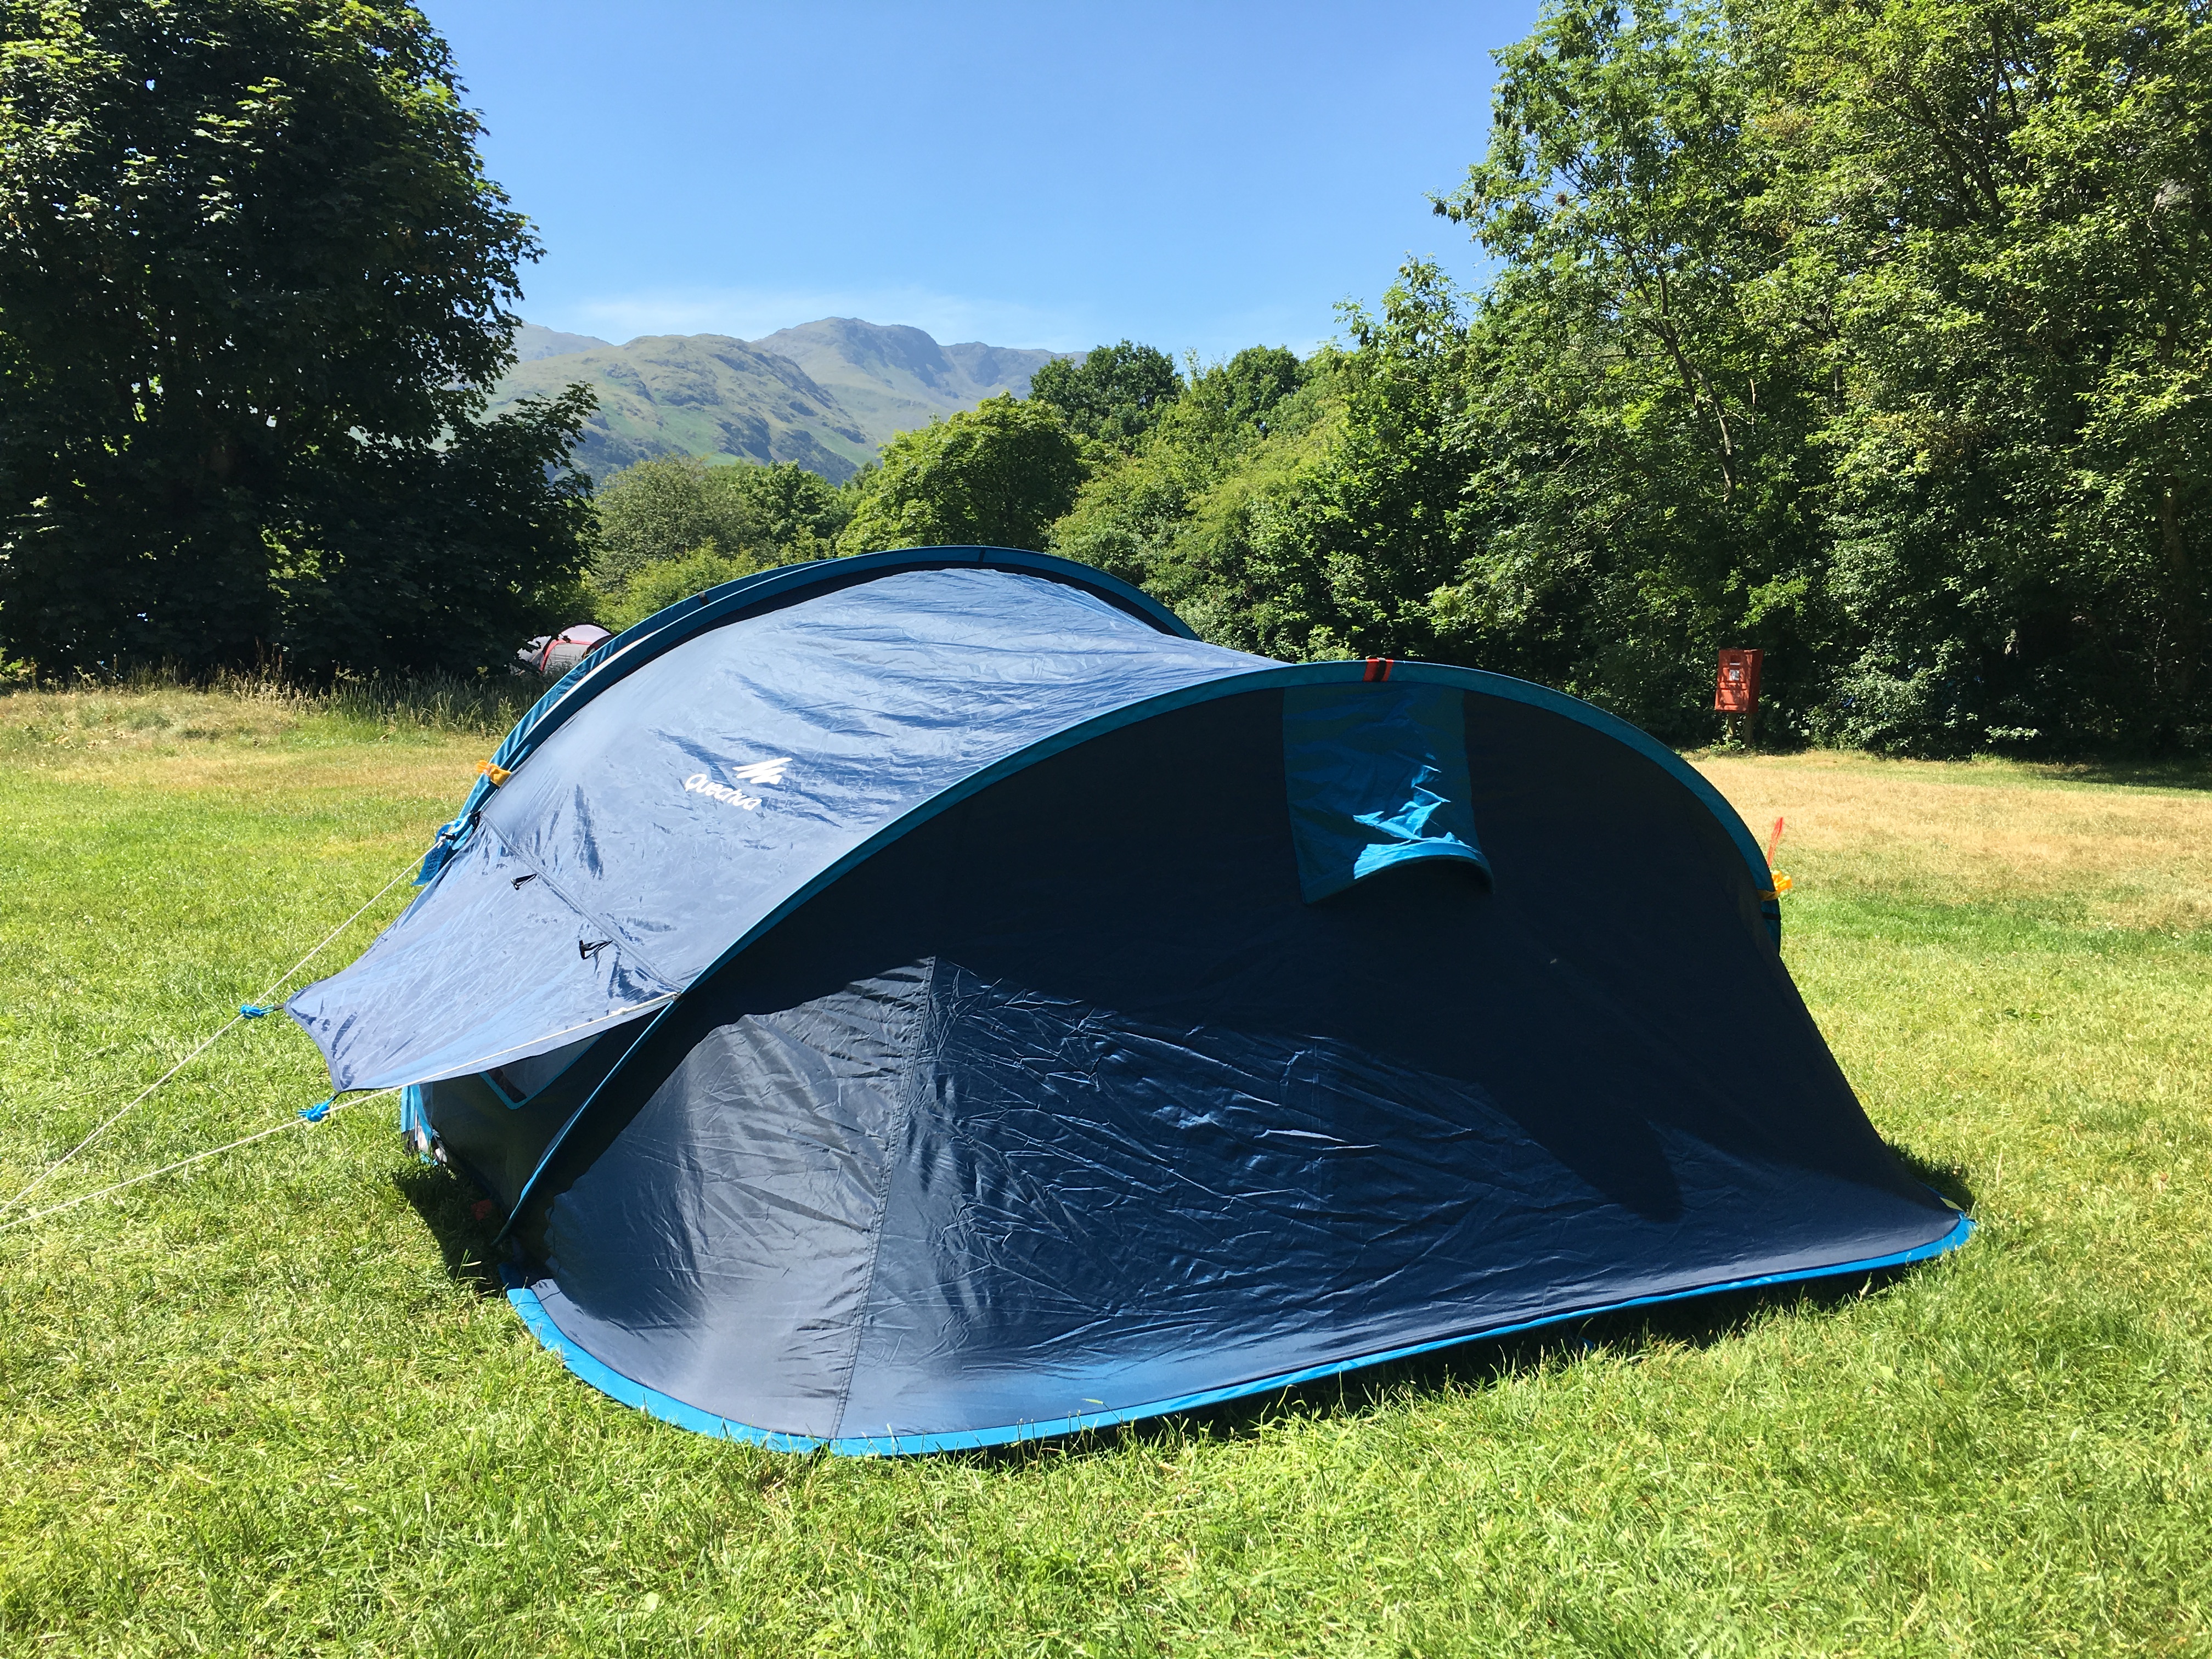 Tent with a view, Langdale Valley